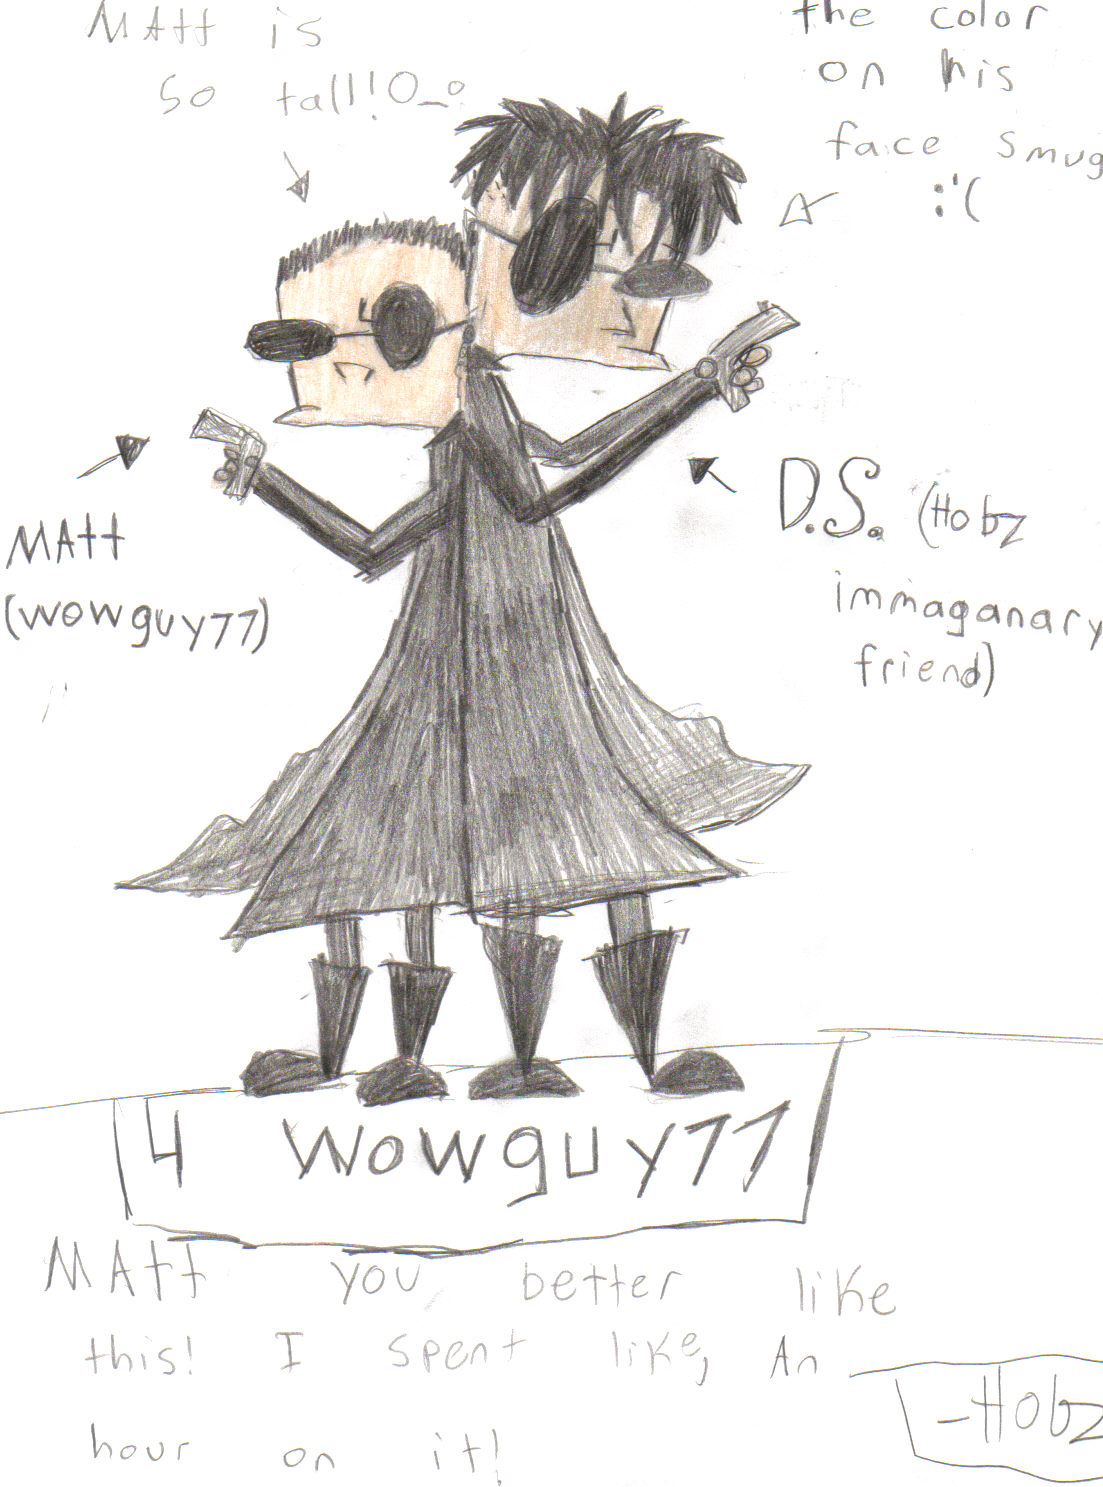 request for wowguy77 by Hobz_the_destroyer